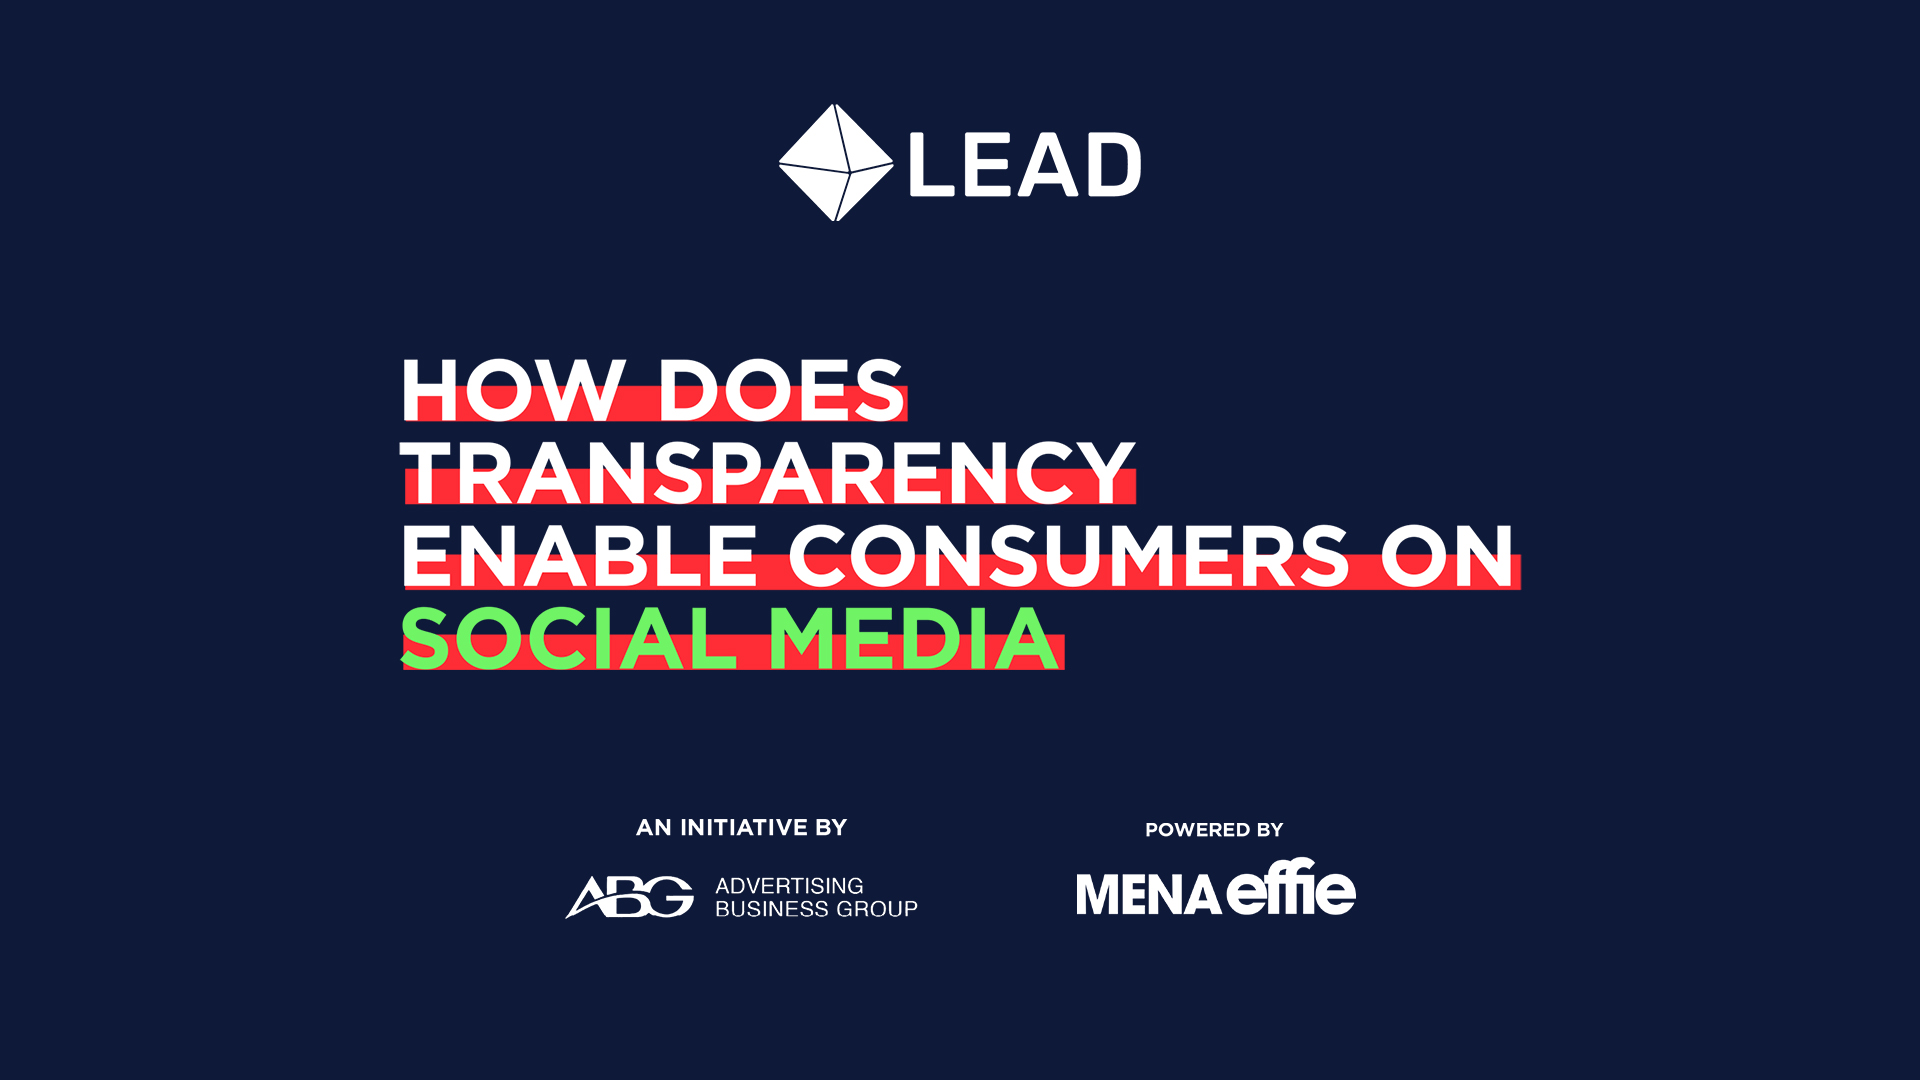 How Does Transparency Enable Consumers on Social Media?